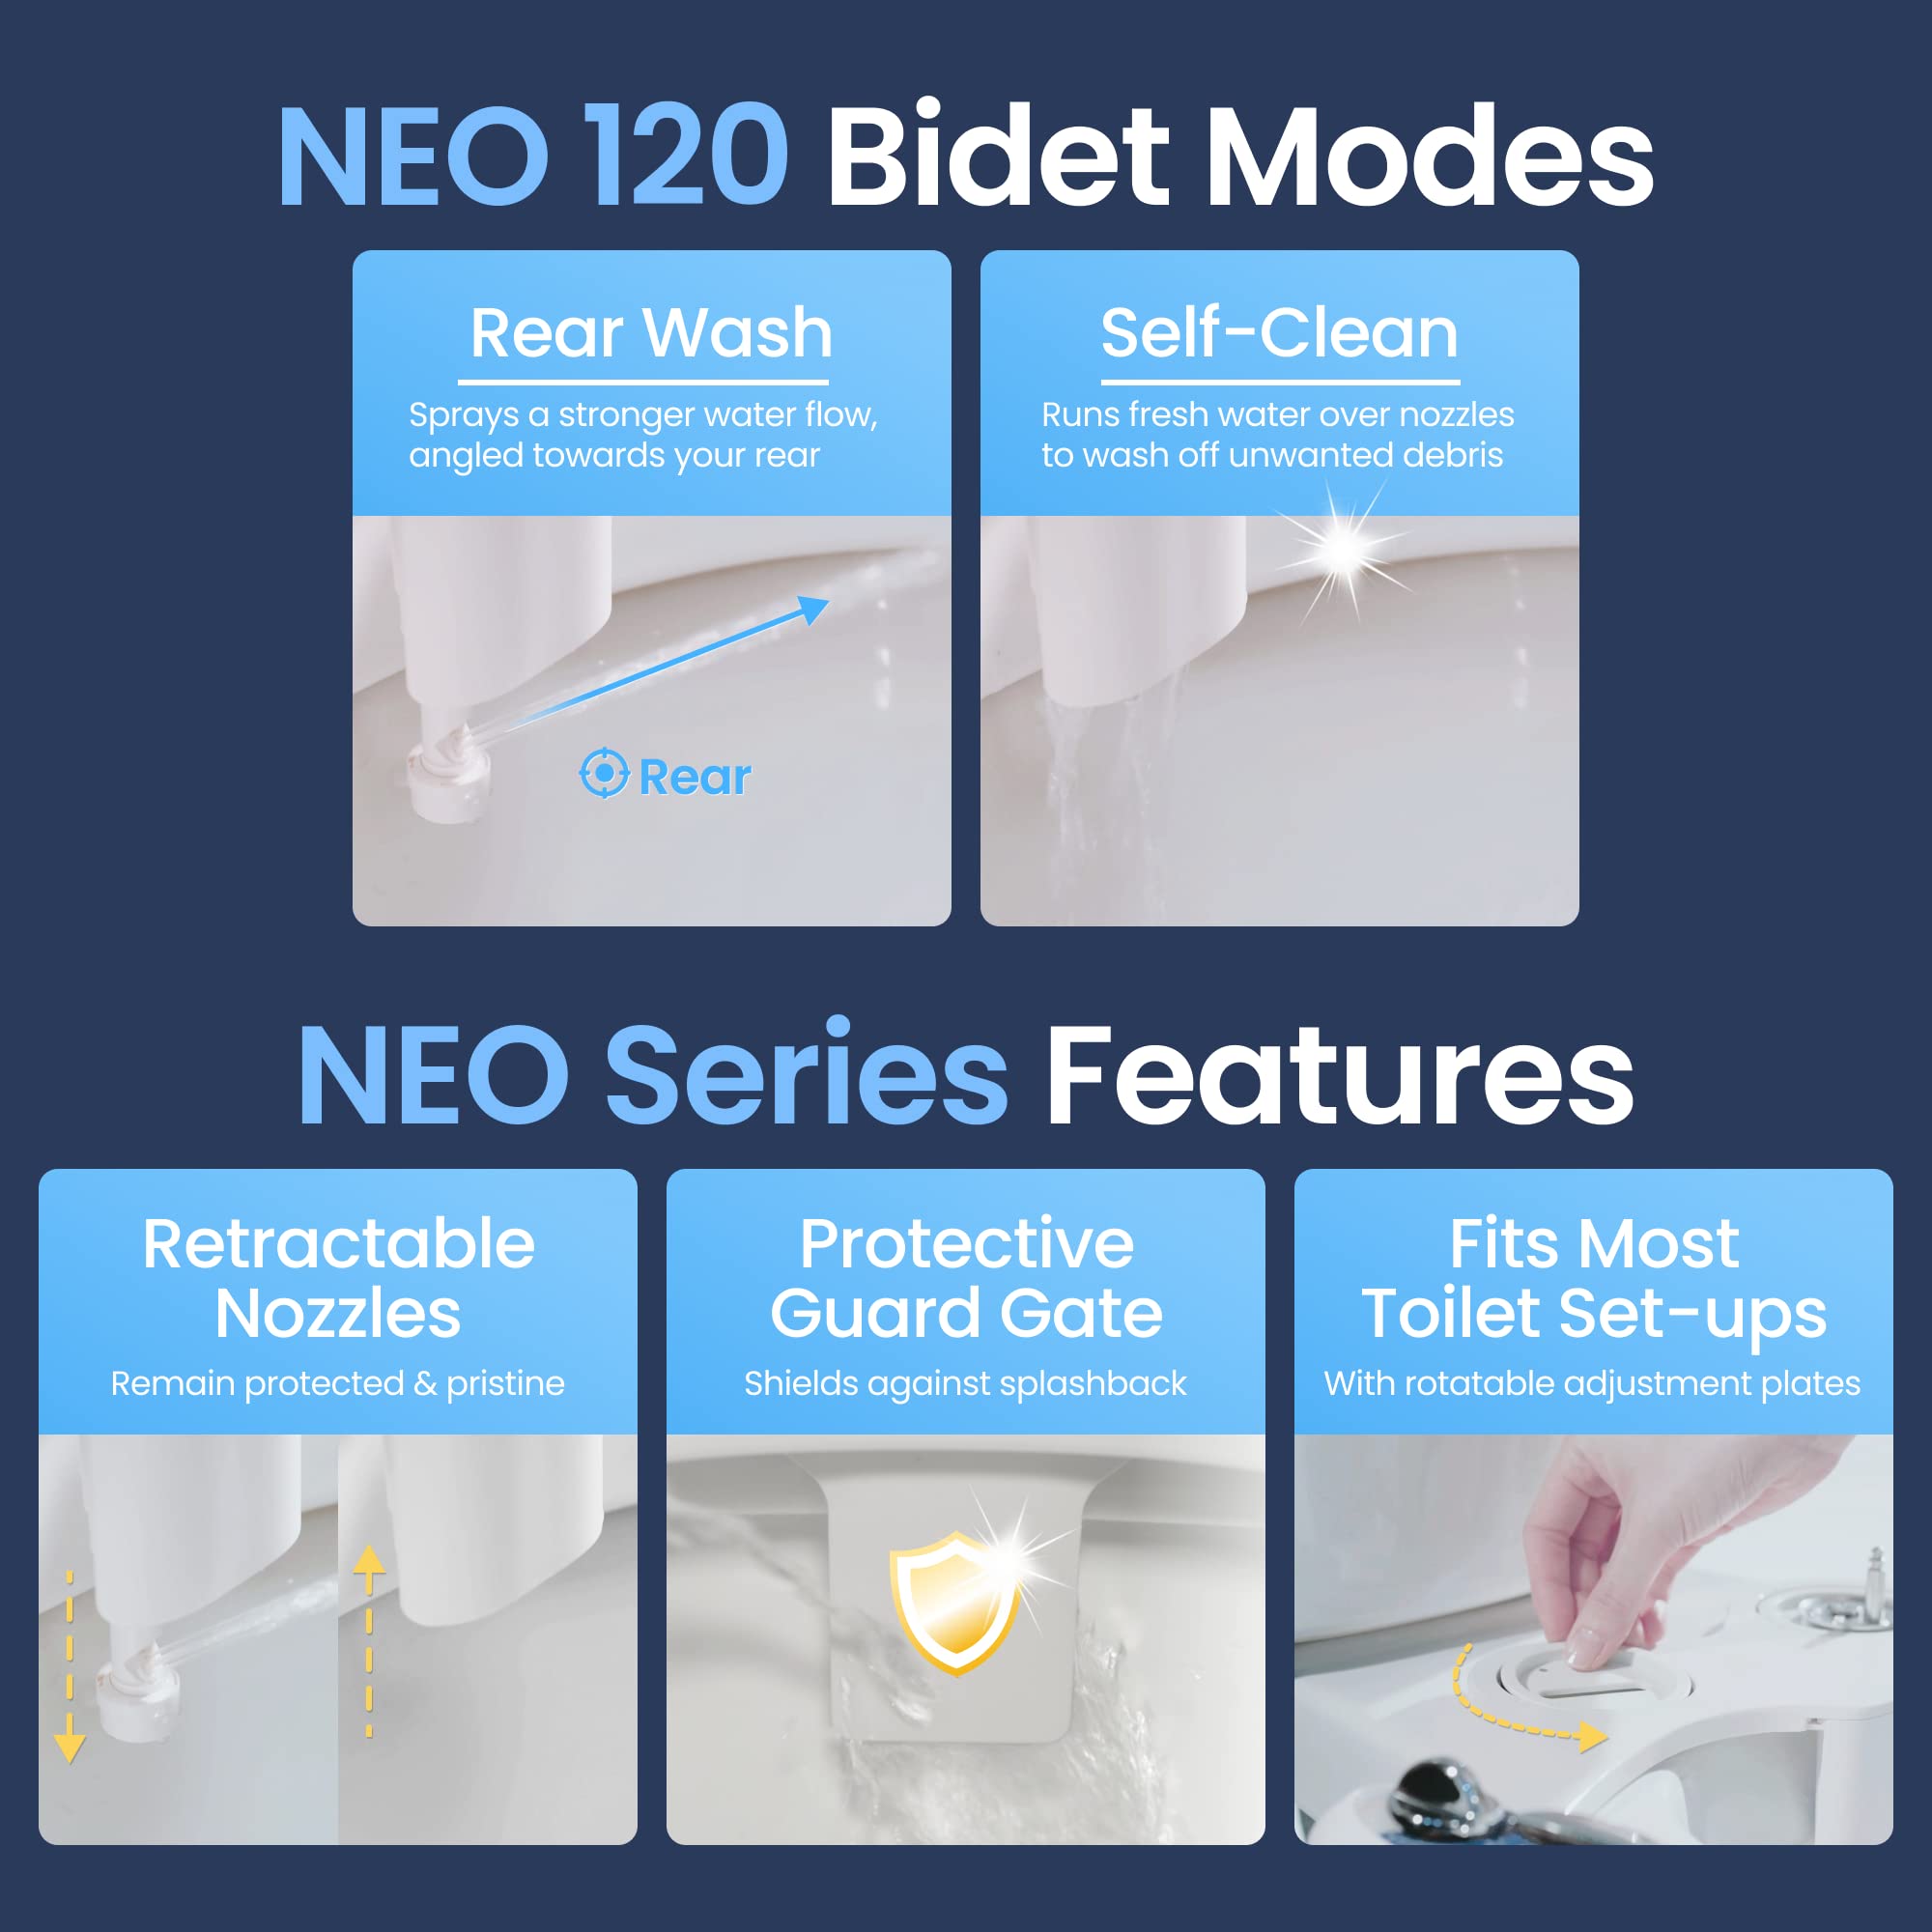 LUXE Bidet NEO 120 - Self-Cleaning Nozzle, Fresh Water Non-Electric Bidet Attachment for Toilet Seat, Adjustable Water Pressure, Rear Wash (Rose Gold)